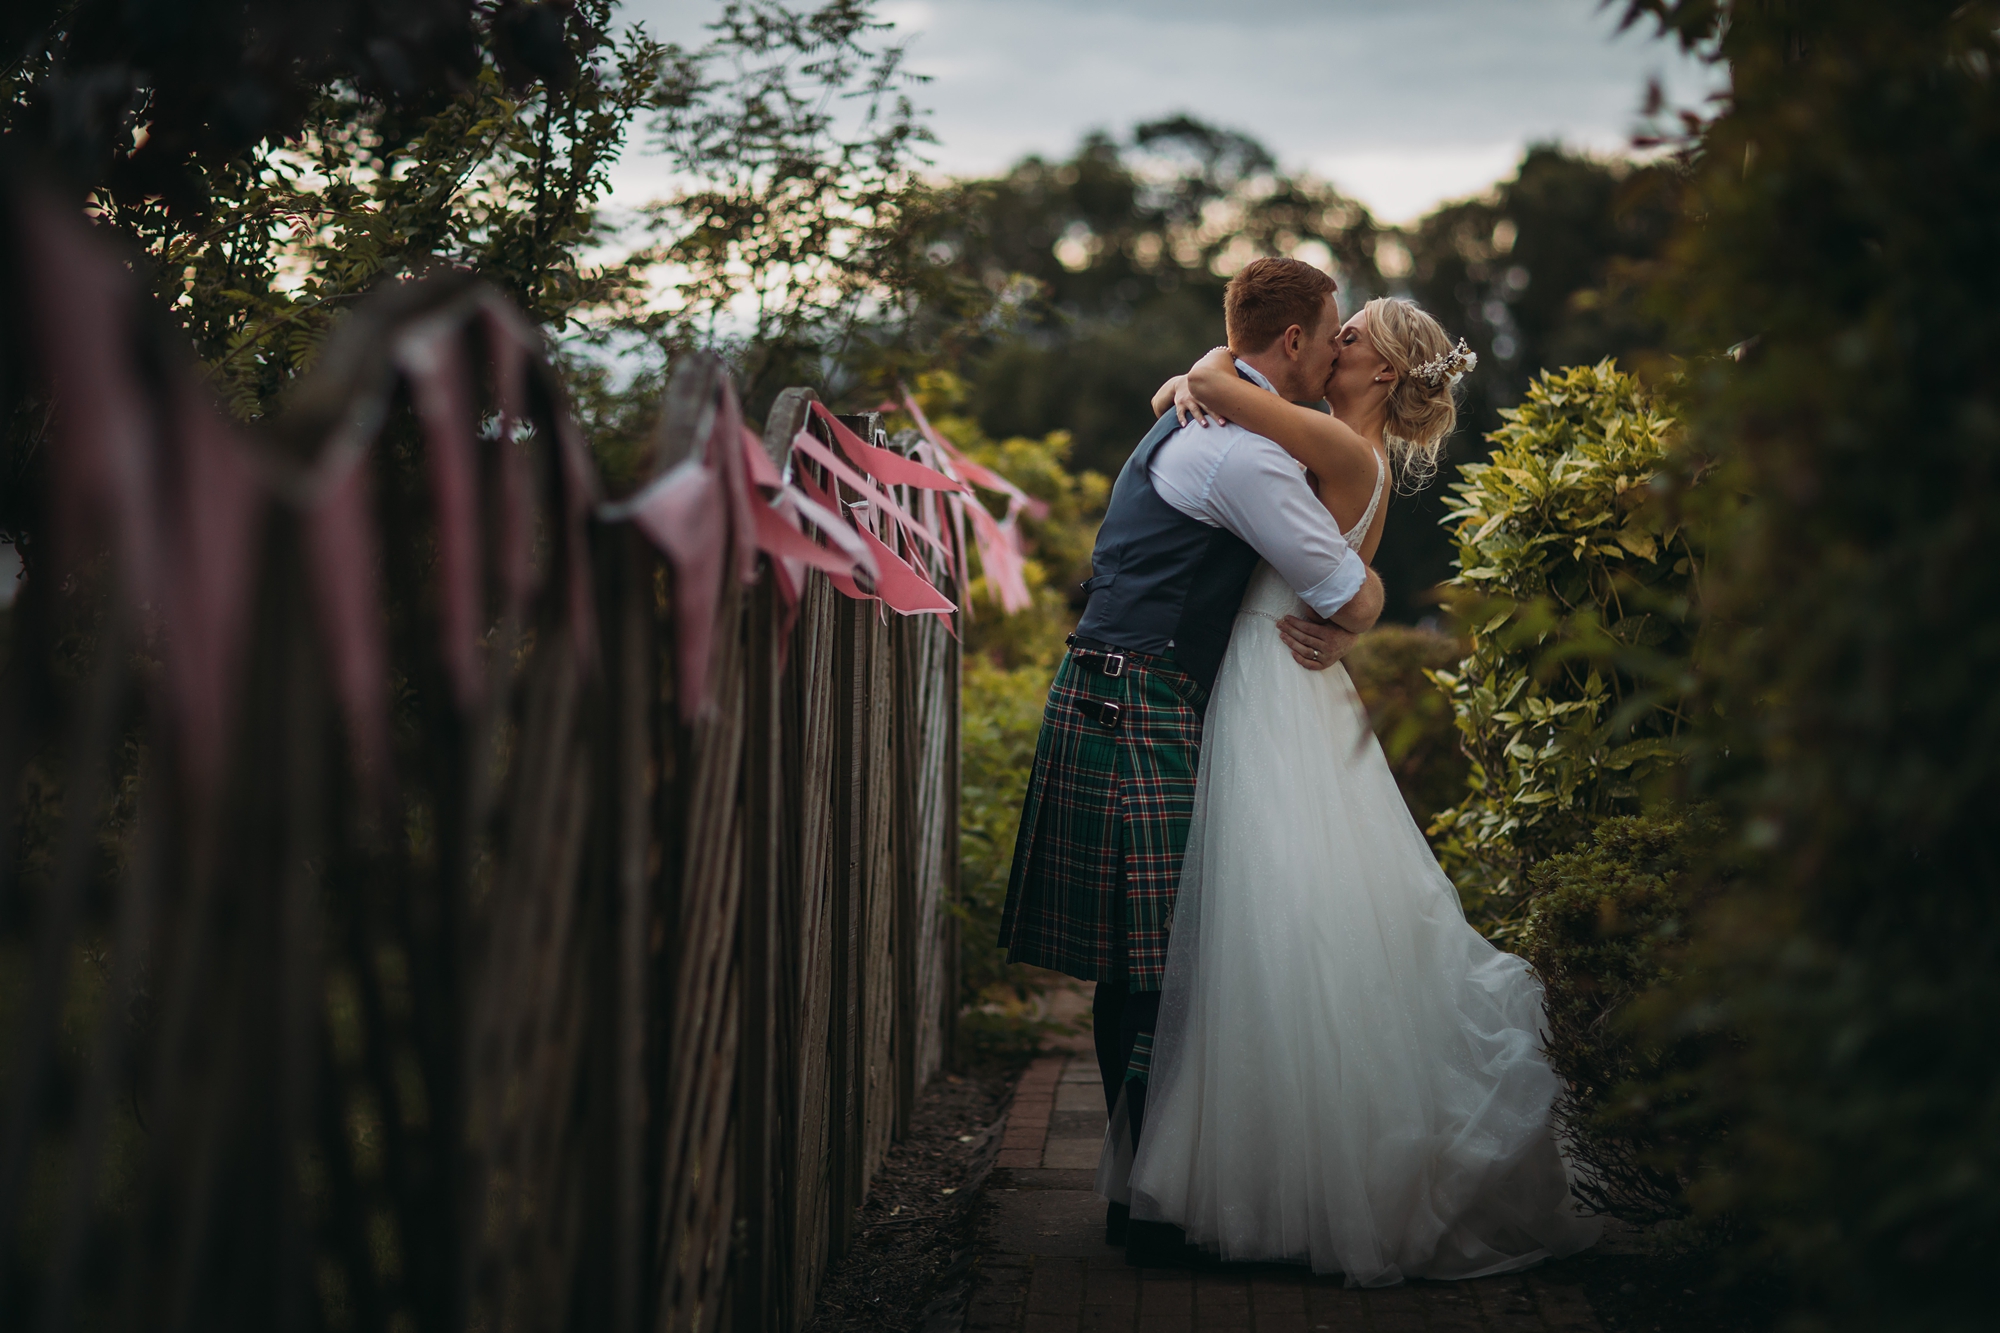 newlyweds in the evening ight at Loch Lomond, best wedding photographs